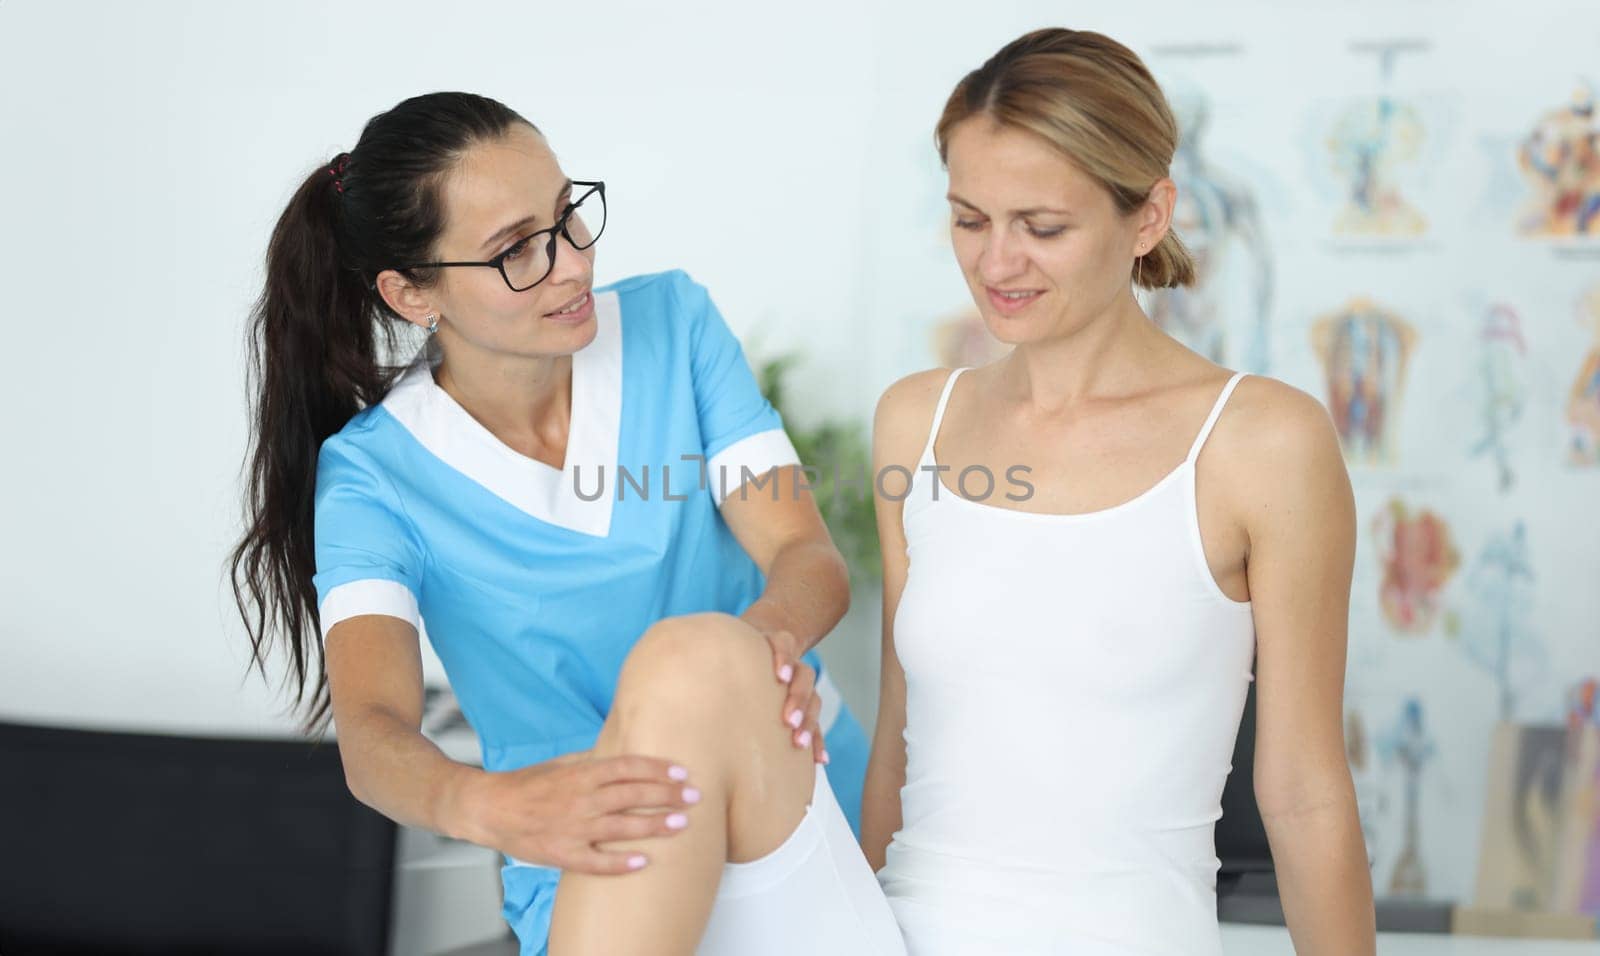 Female patient receiving medical care in rehabilitation center after leg injury by kuprevich